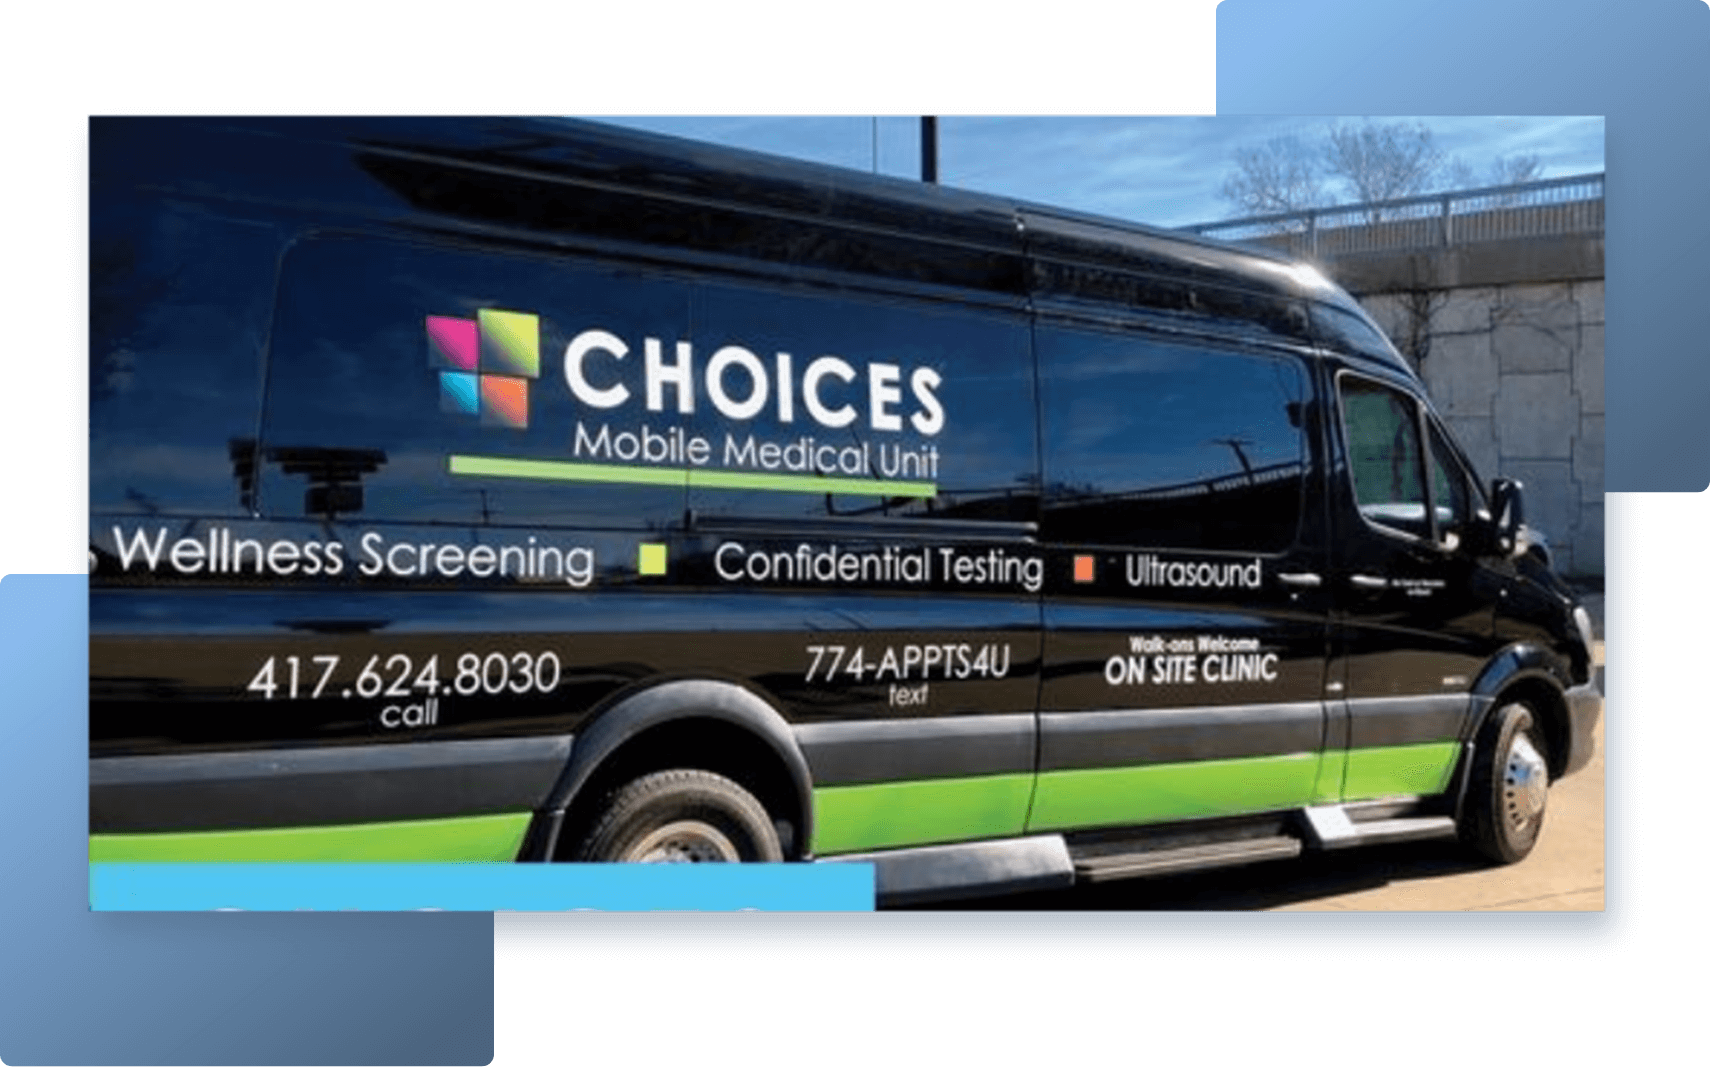 Choices Mobile Medical Unity Bus